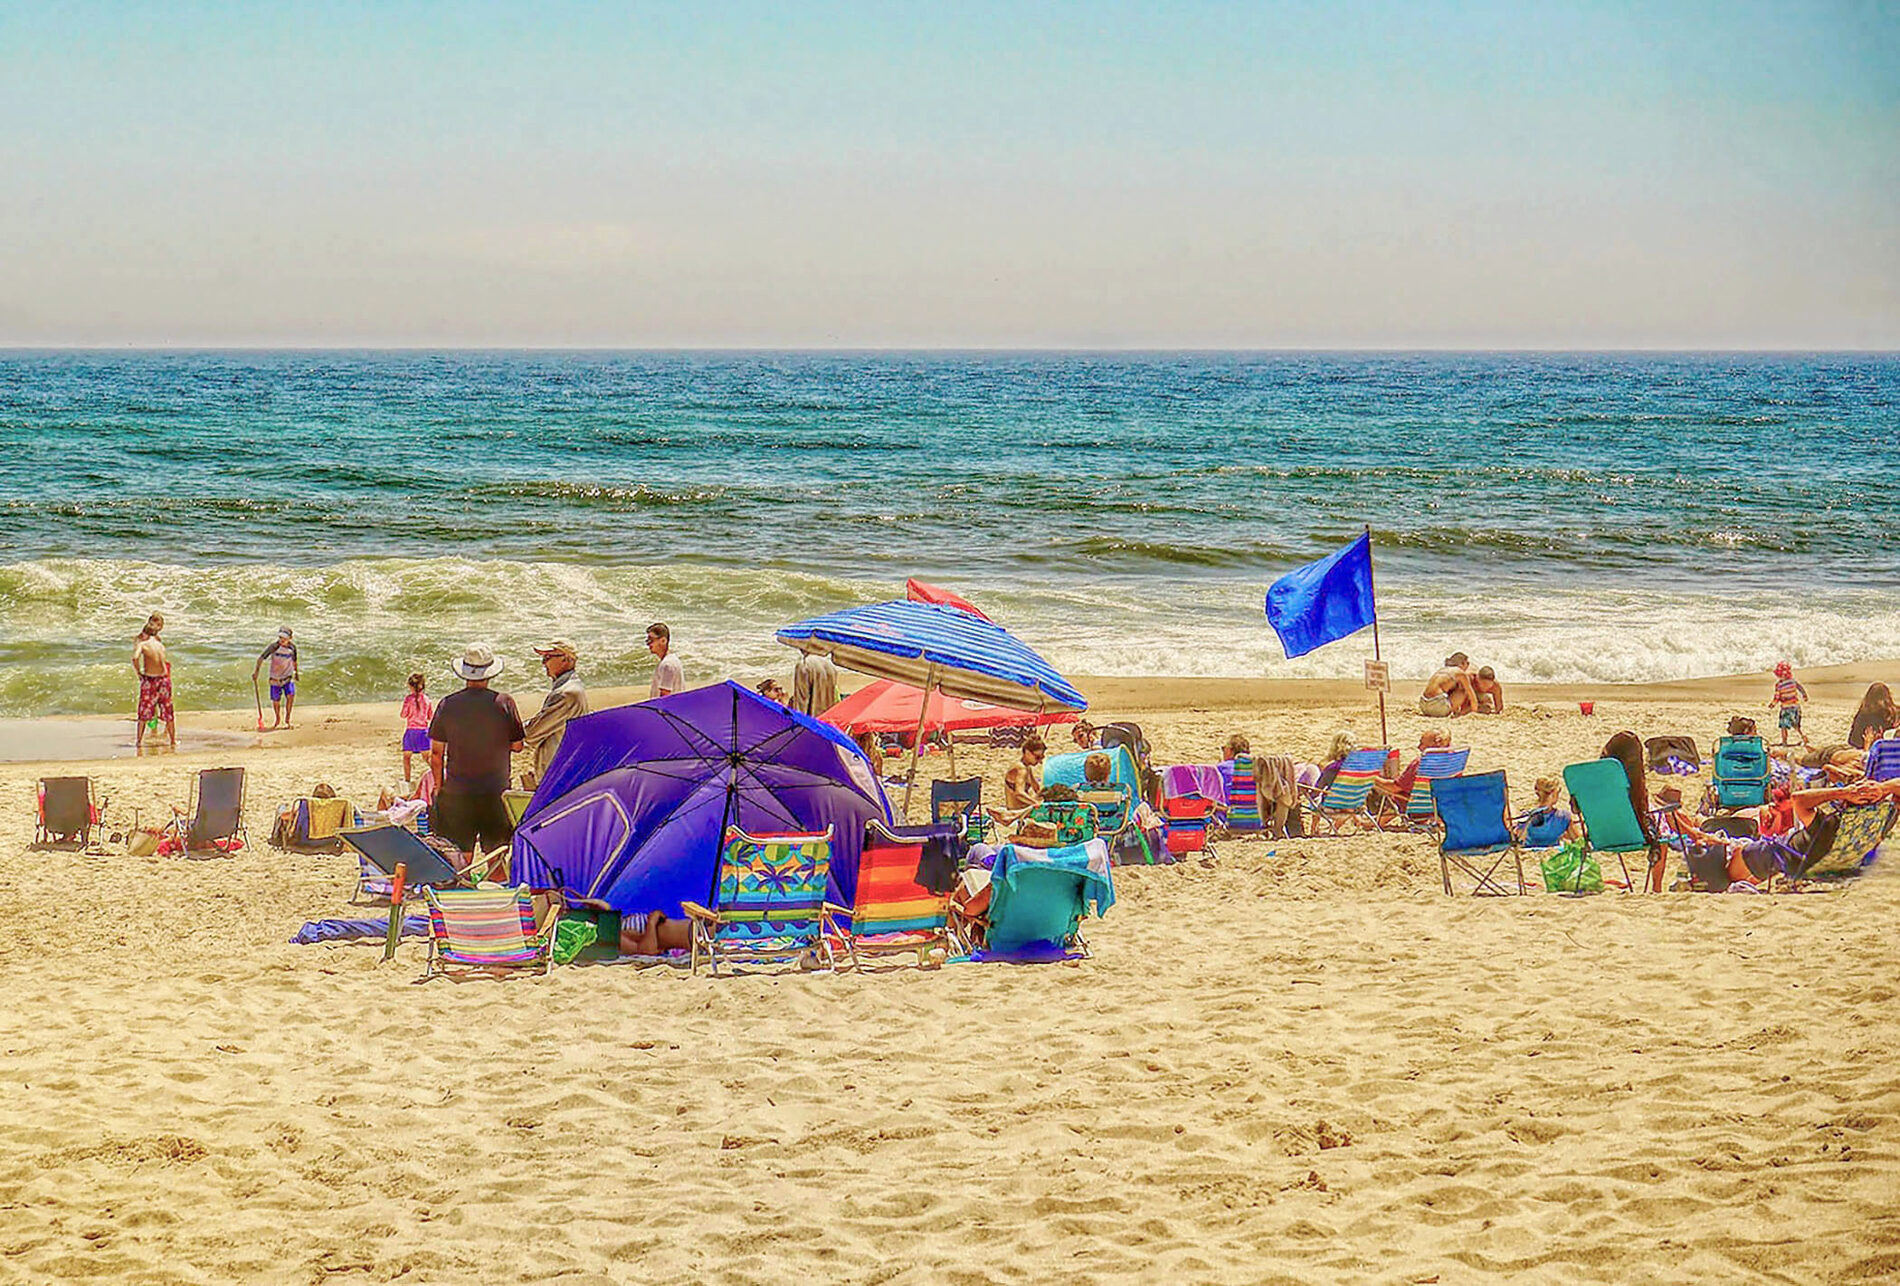 Highly saturated photo of lots people at the beach with many beach chairs and umbrellas set out.